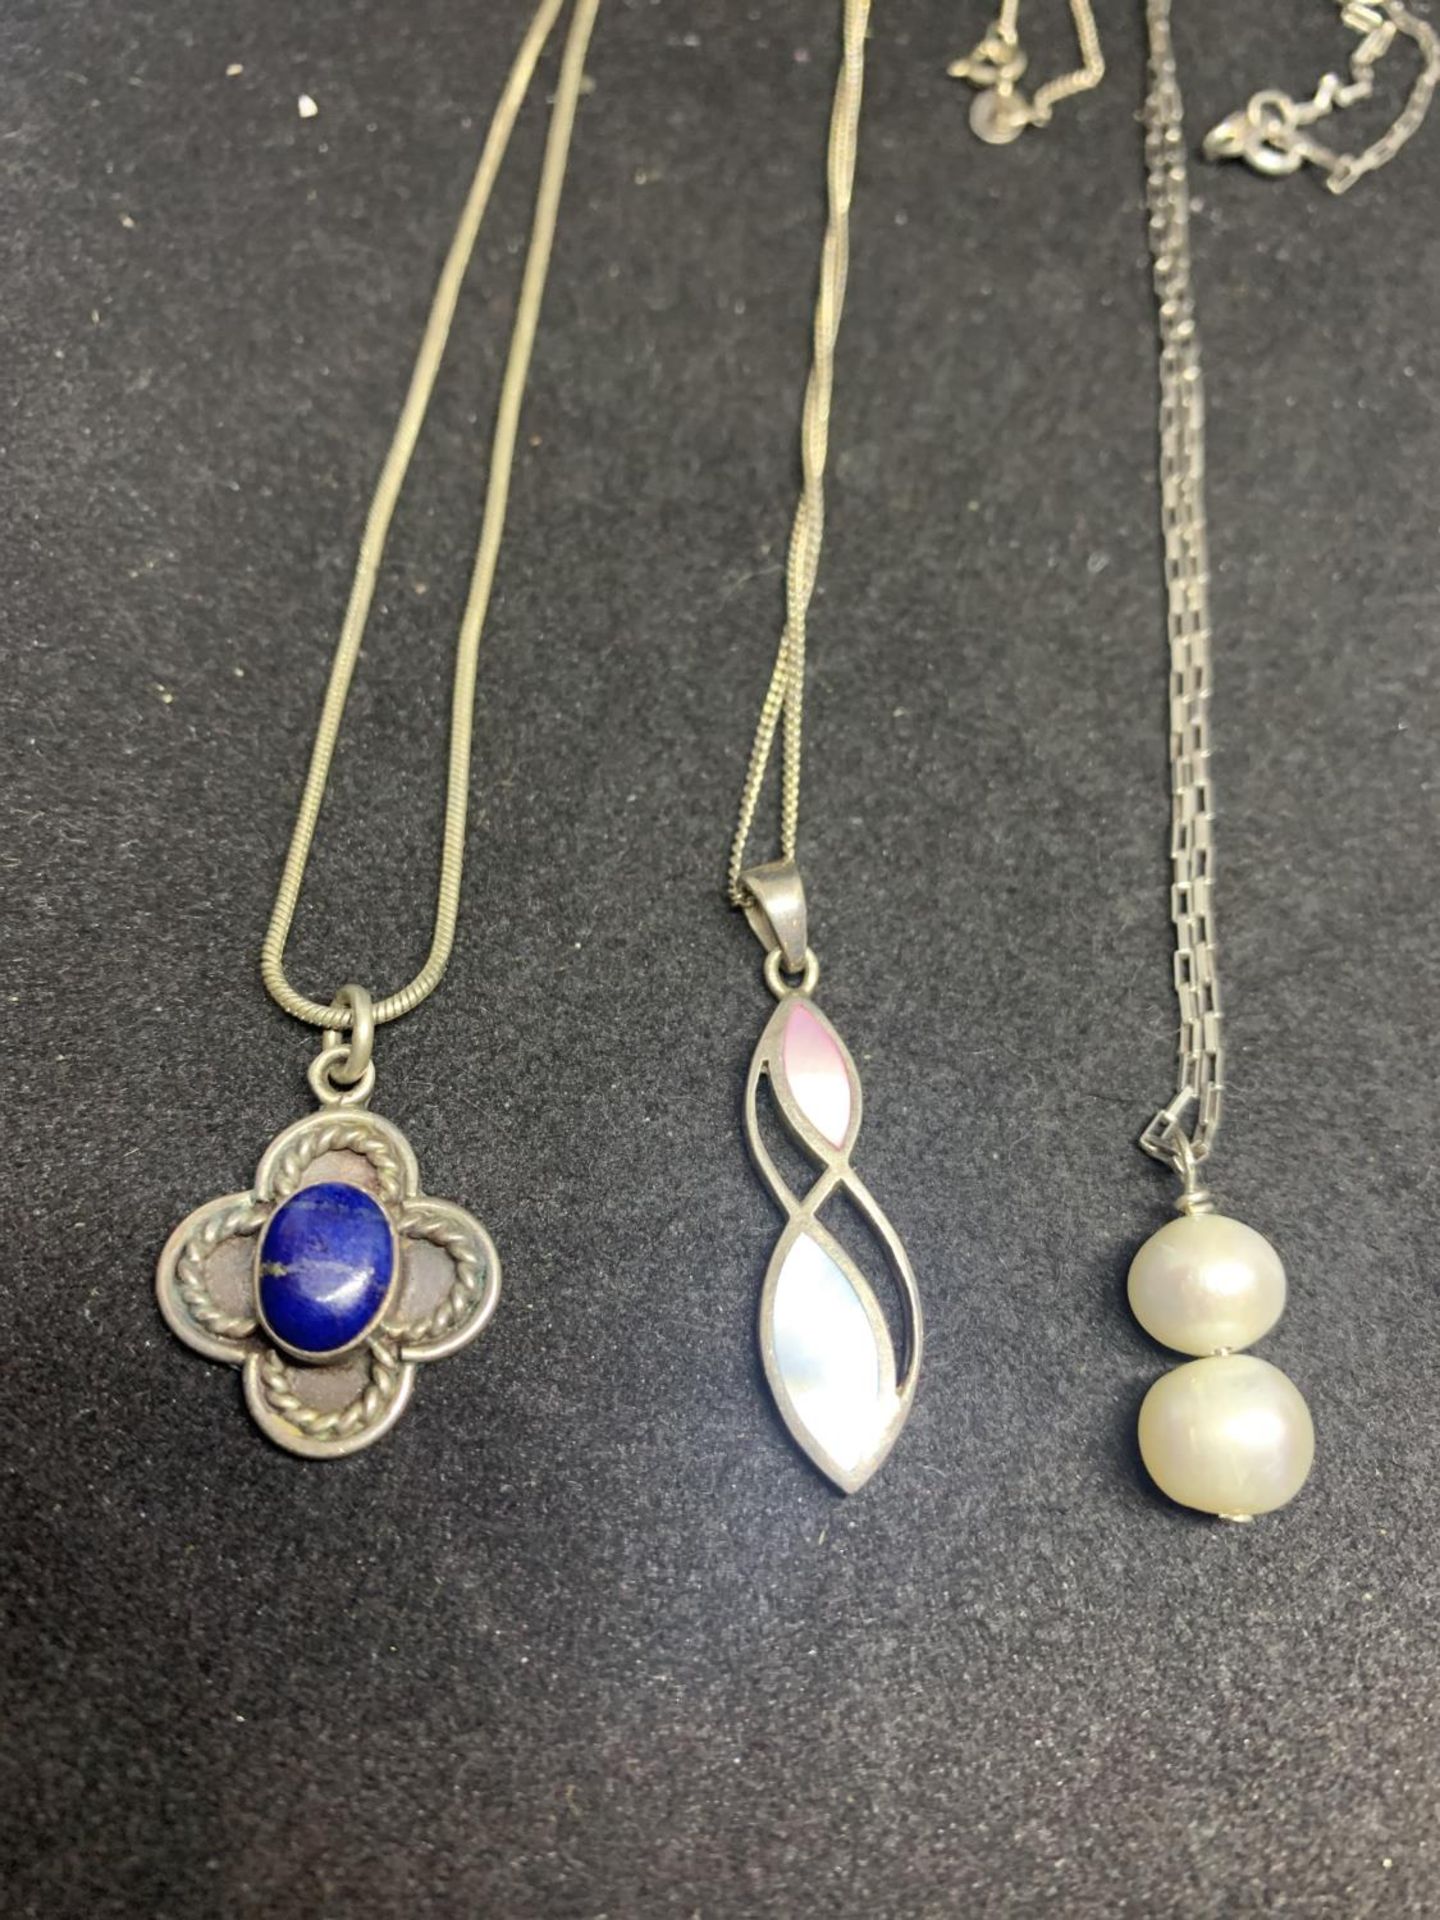 SIX MARKED SLIVER PENDANTS ON CHAINS TO INCLUDE A CLEAR STONE CROSS, HEART, BLUE STONE, PEARL ETC - Image 2 of 3